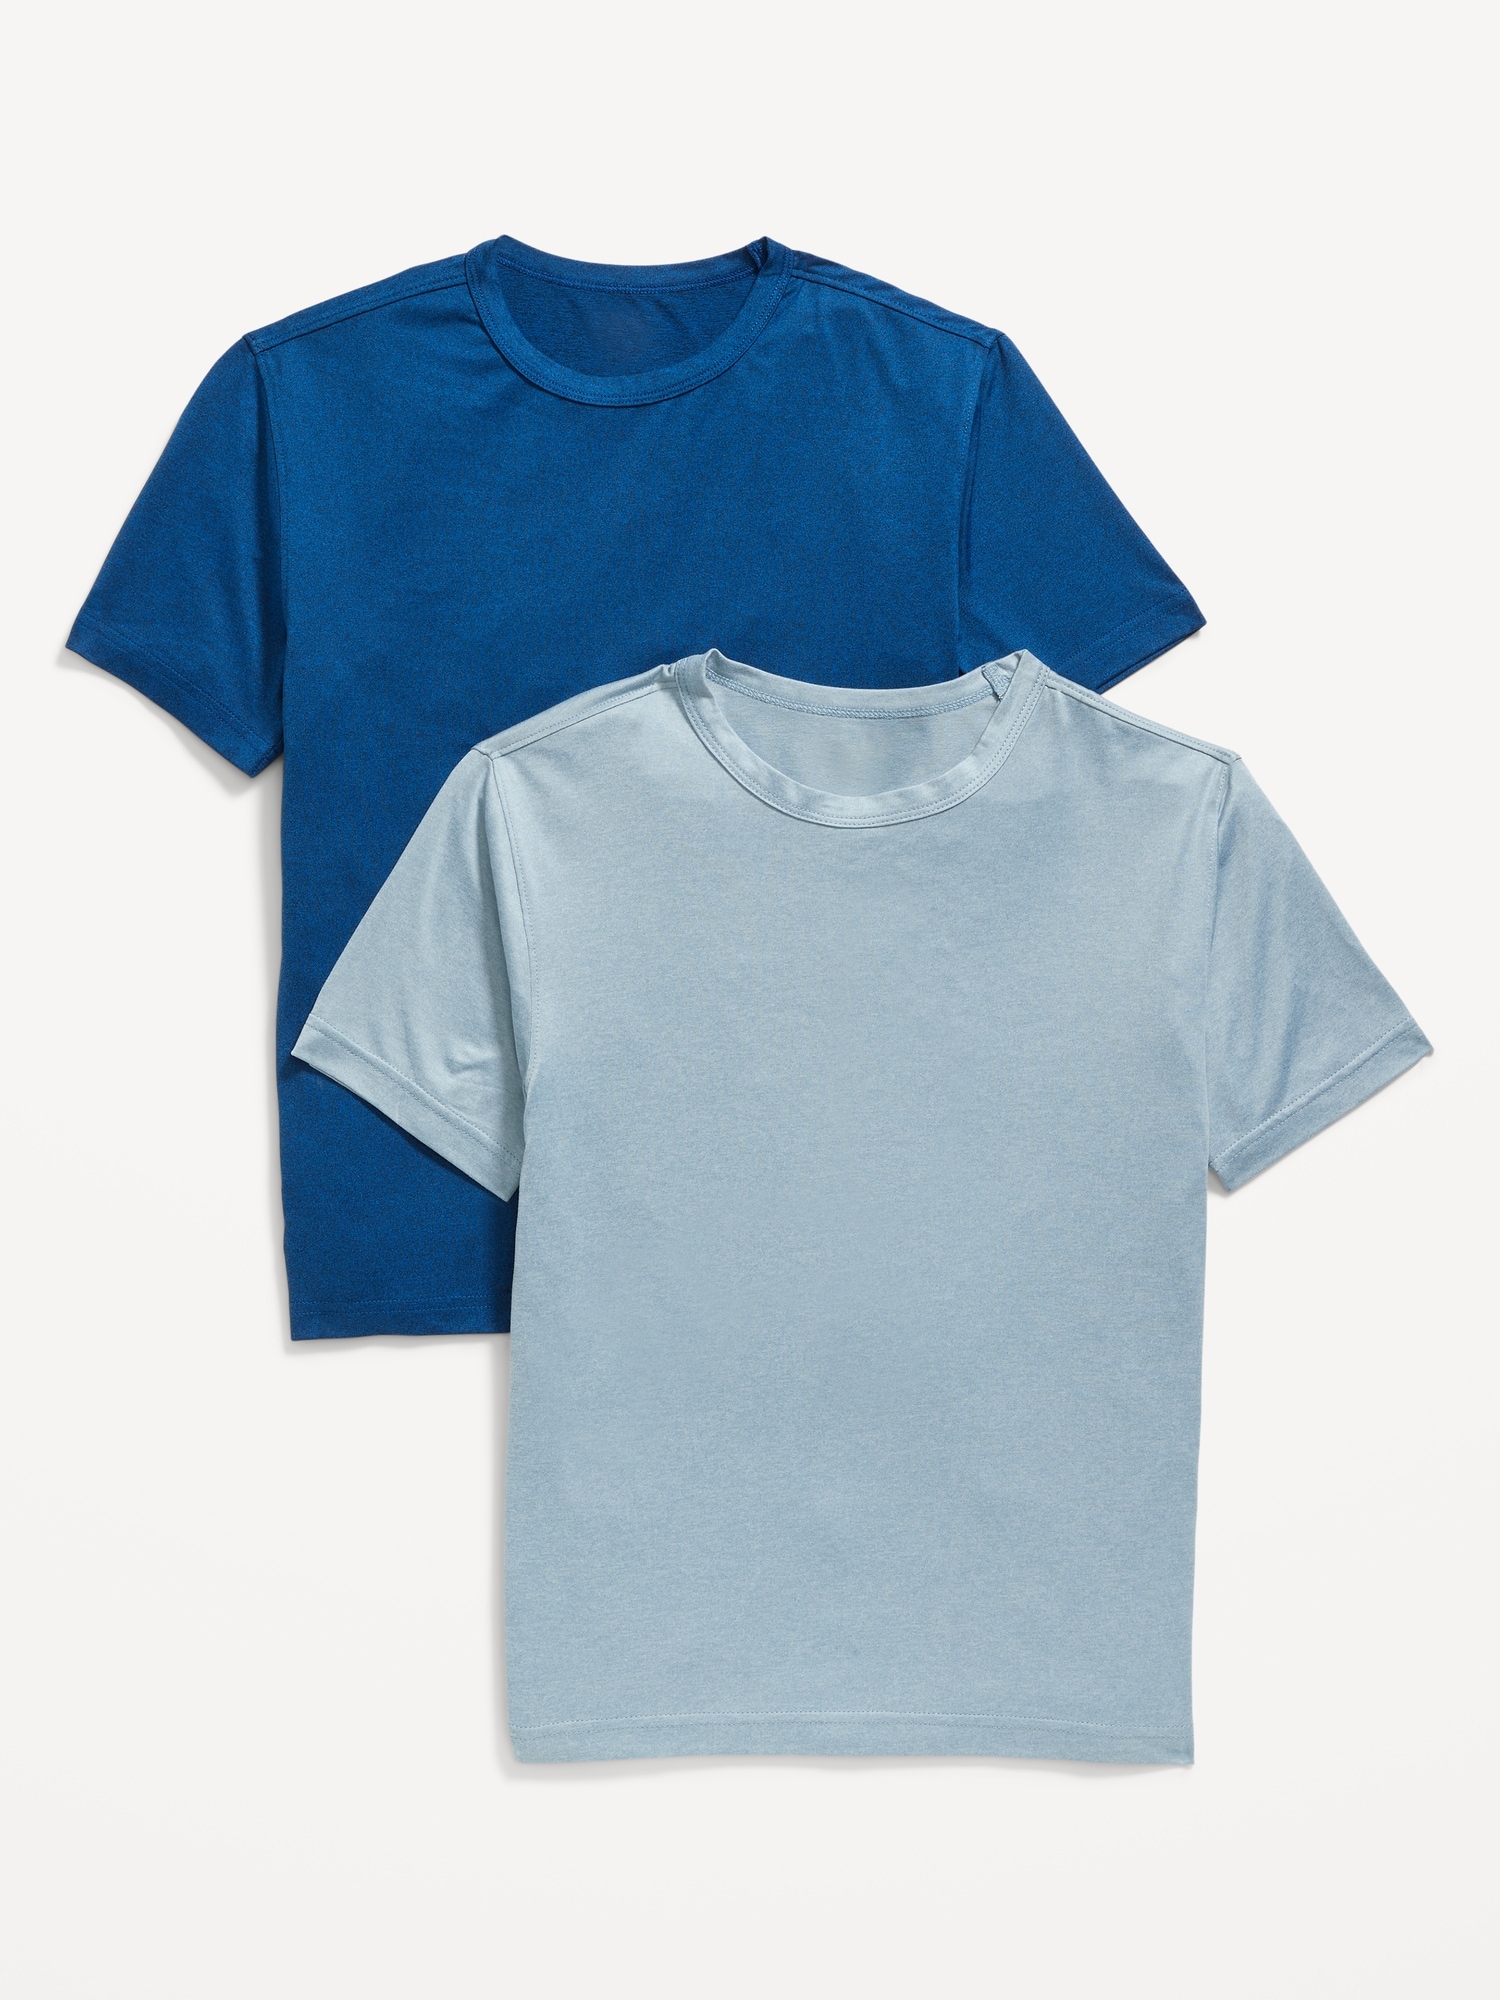 Cloud 94 Soft Go-Dry Cool Performance T-Shirt 2-Pack for Boys Hot Deal